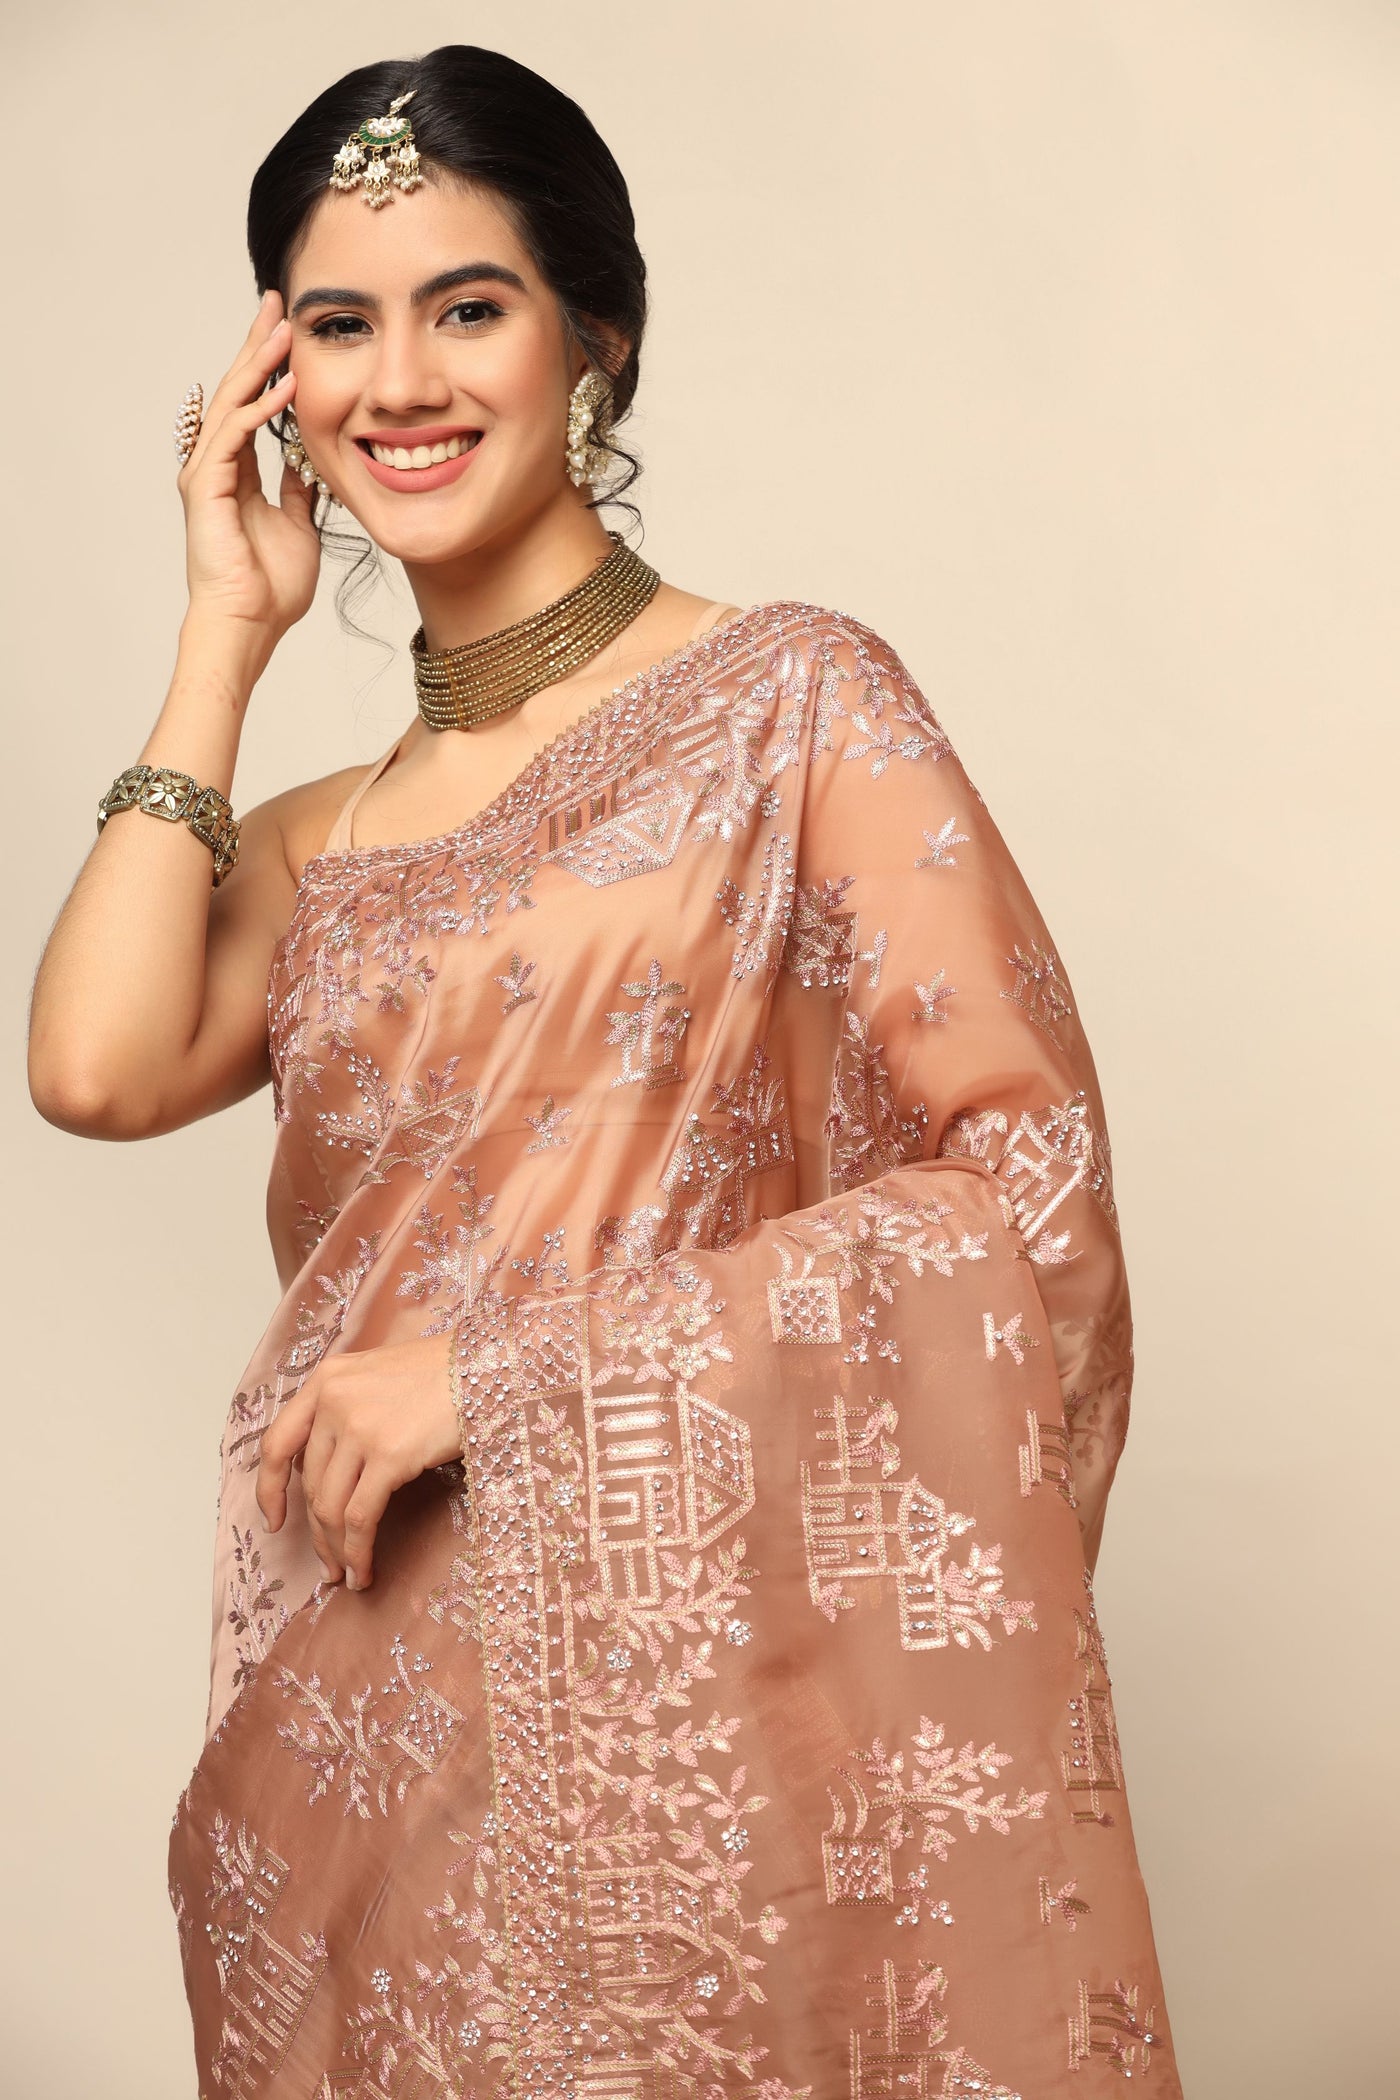 Glamorous Brown Sequins Saree with Thread Work and Zari Embellishments